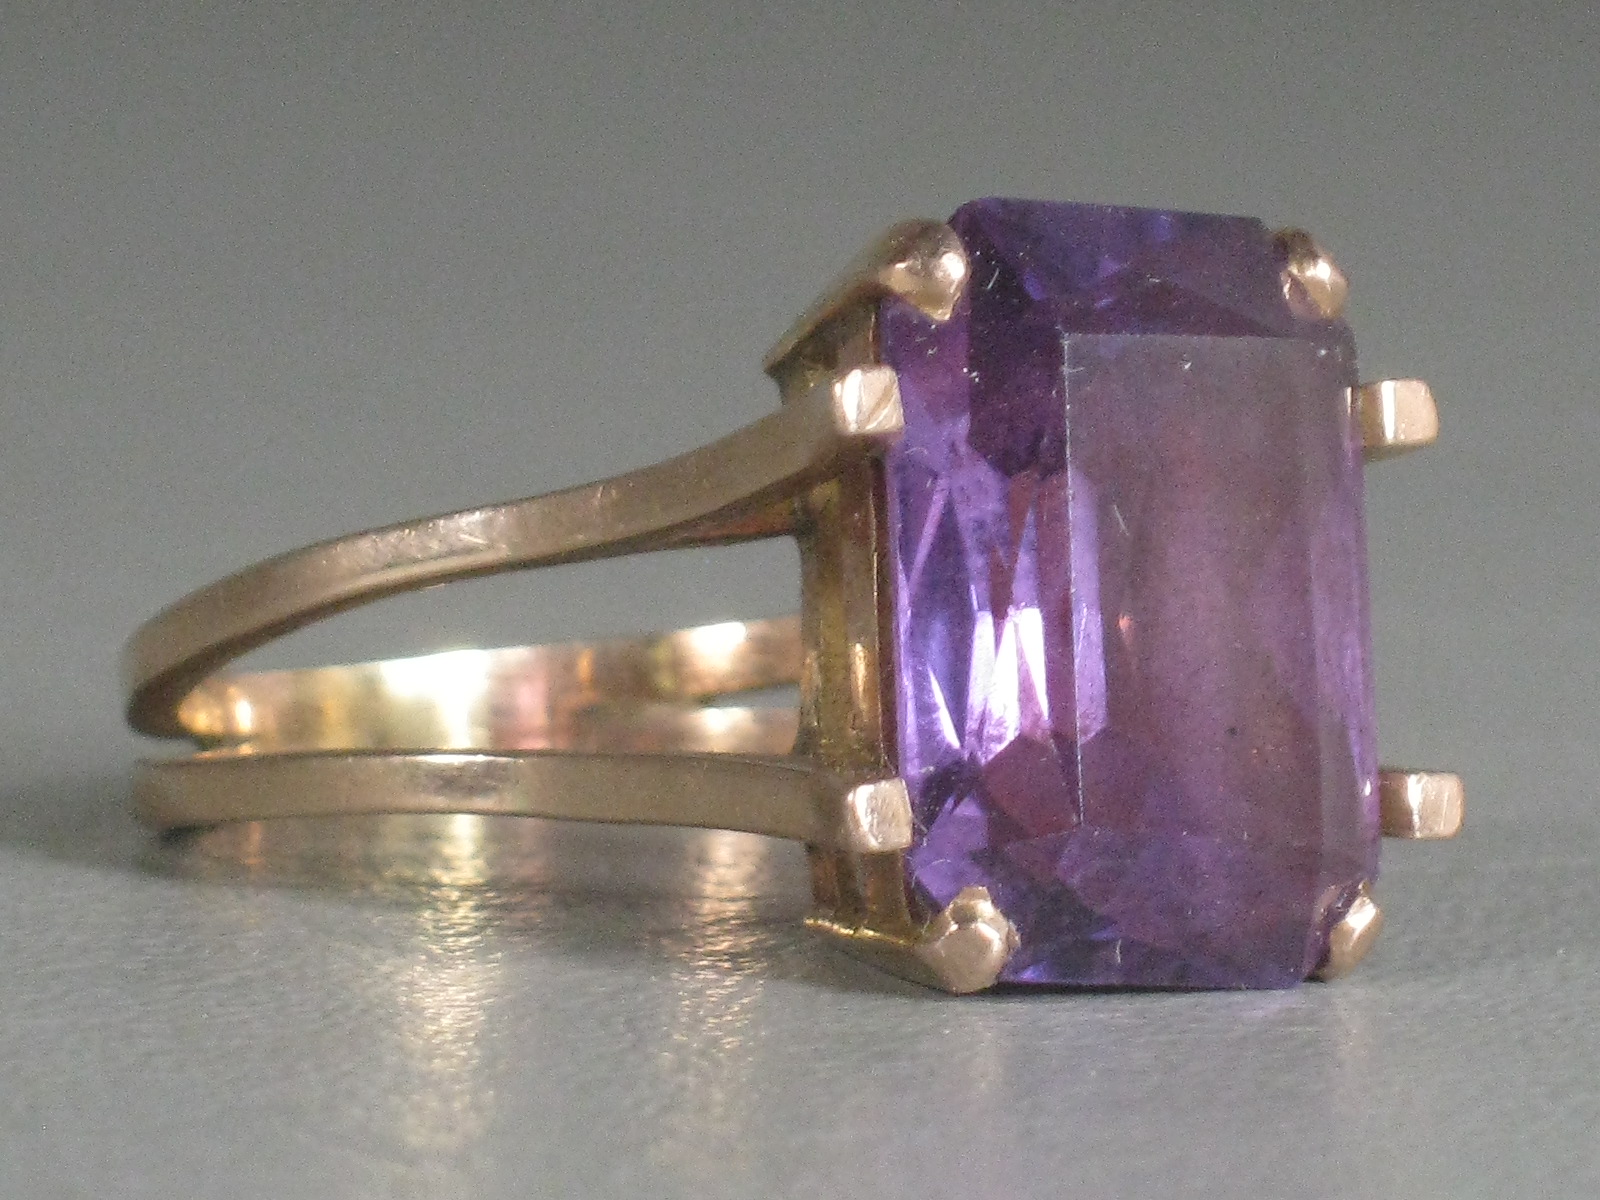 Vintage Antique Amethyst Ring Size 8.25 Estate Jewelry Rose Gold? No Reserve! 1